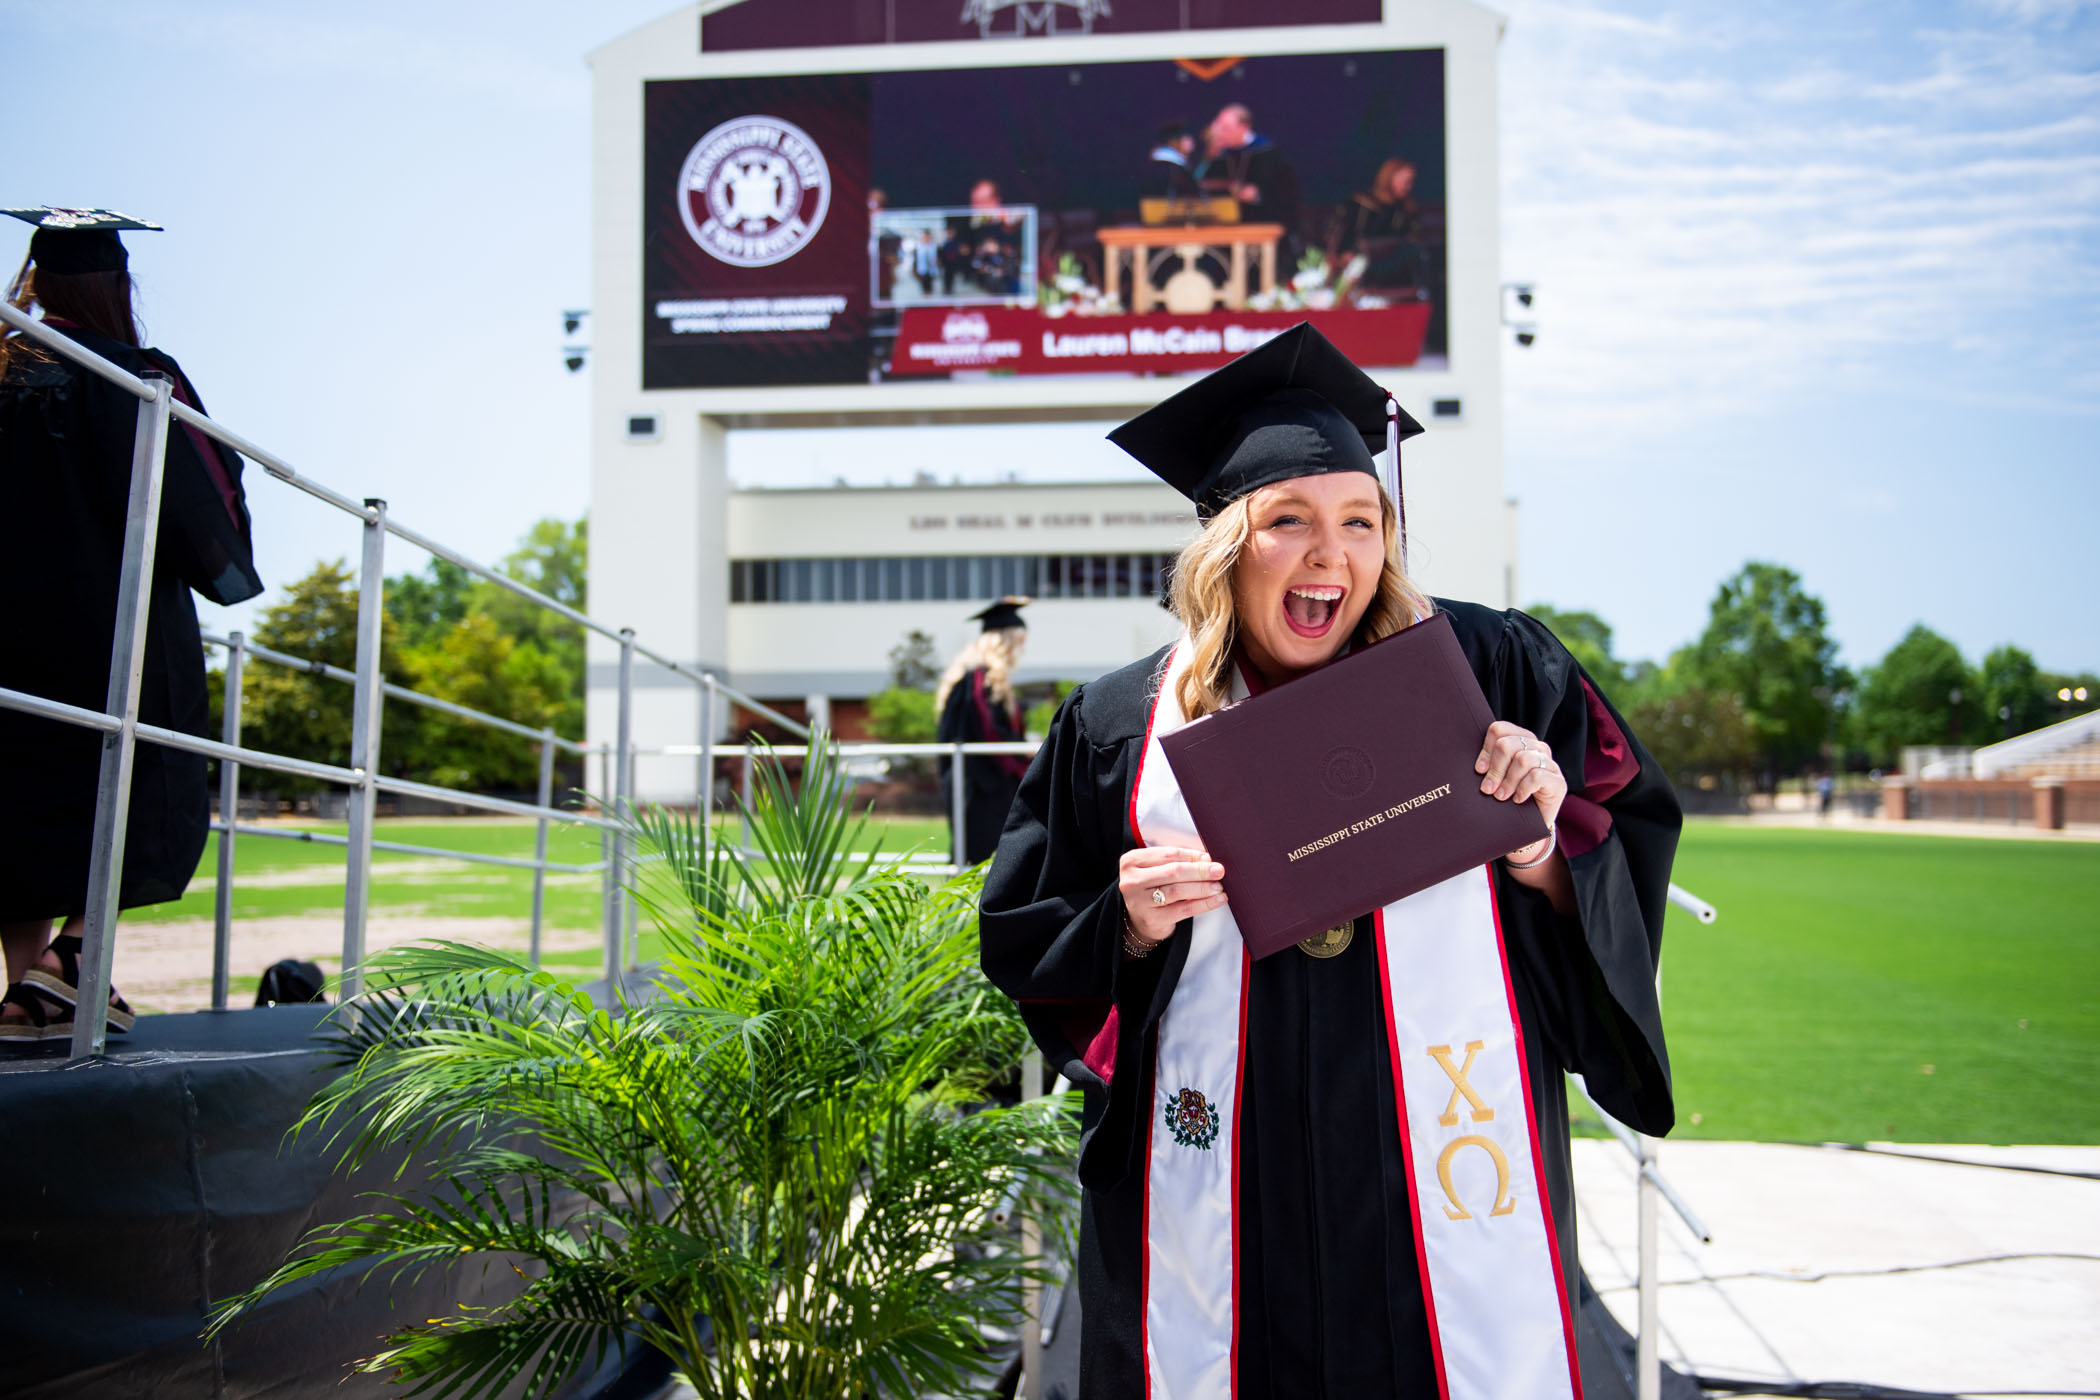 New MSU graduate Hope Kullman beams with a smile while exiting the Spring 2023 Commencement Ceremony stage with her diploma in hand